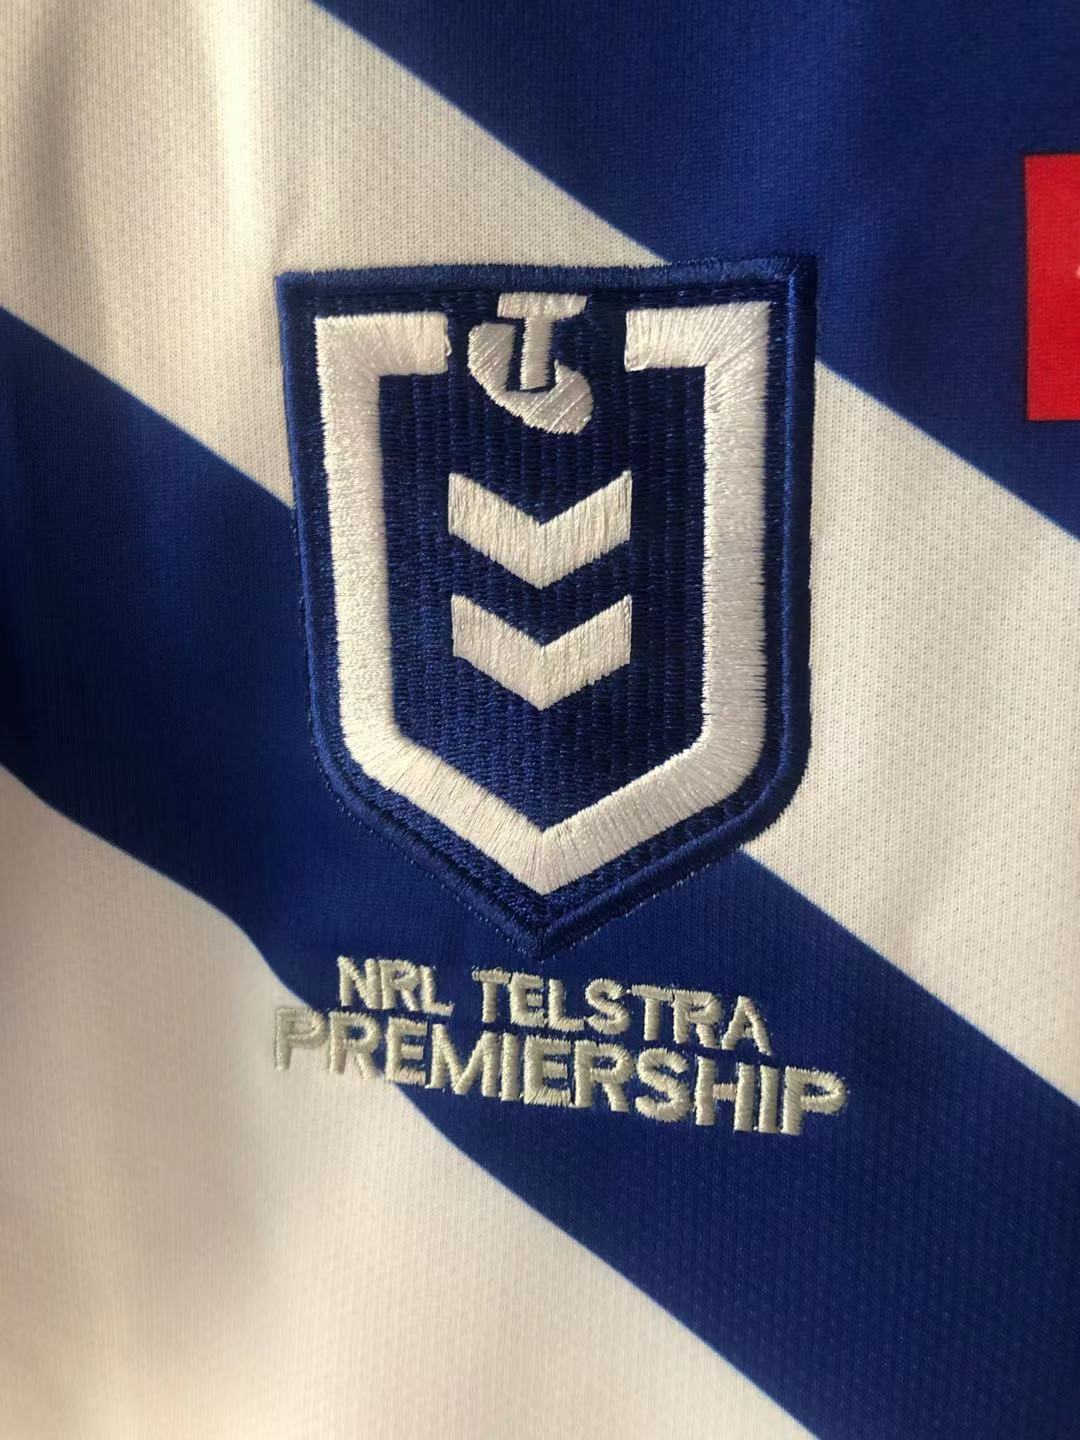 2021 Canterbury-Bankstown Bulldogs Home Rugby Soccer Jersey Replica  Mens